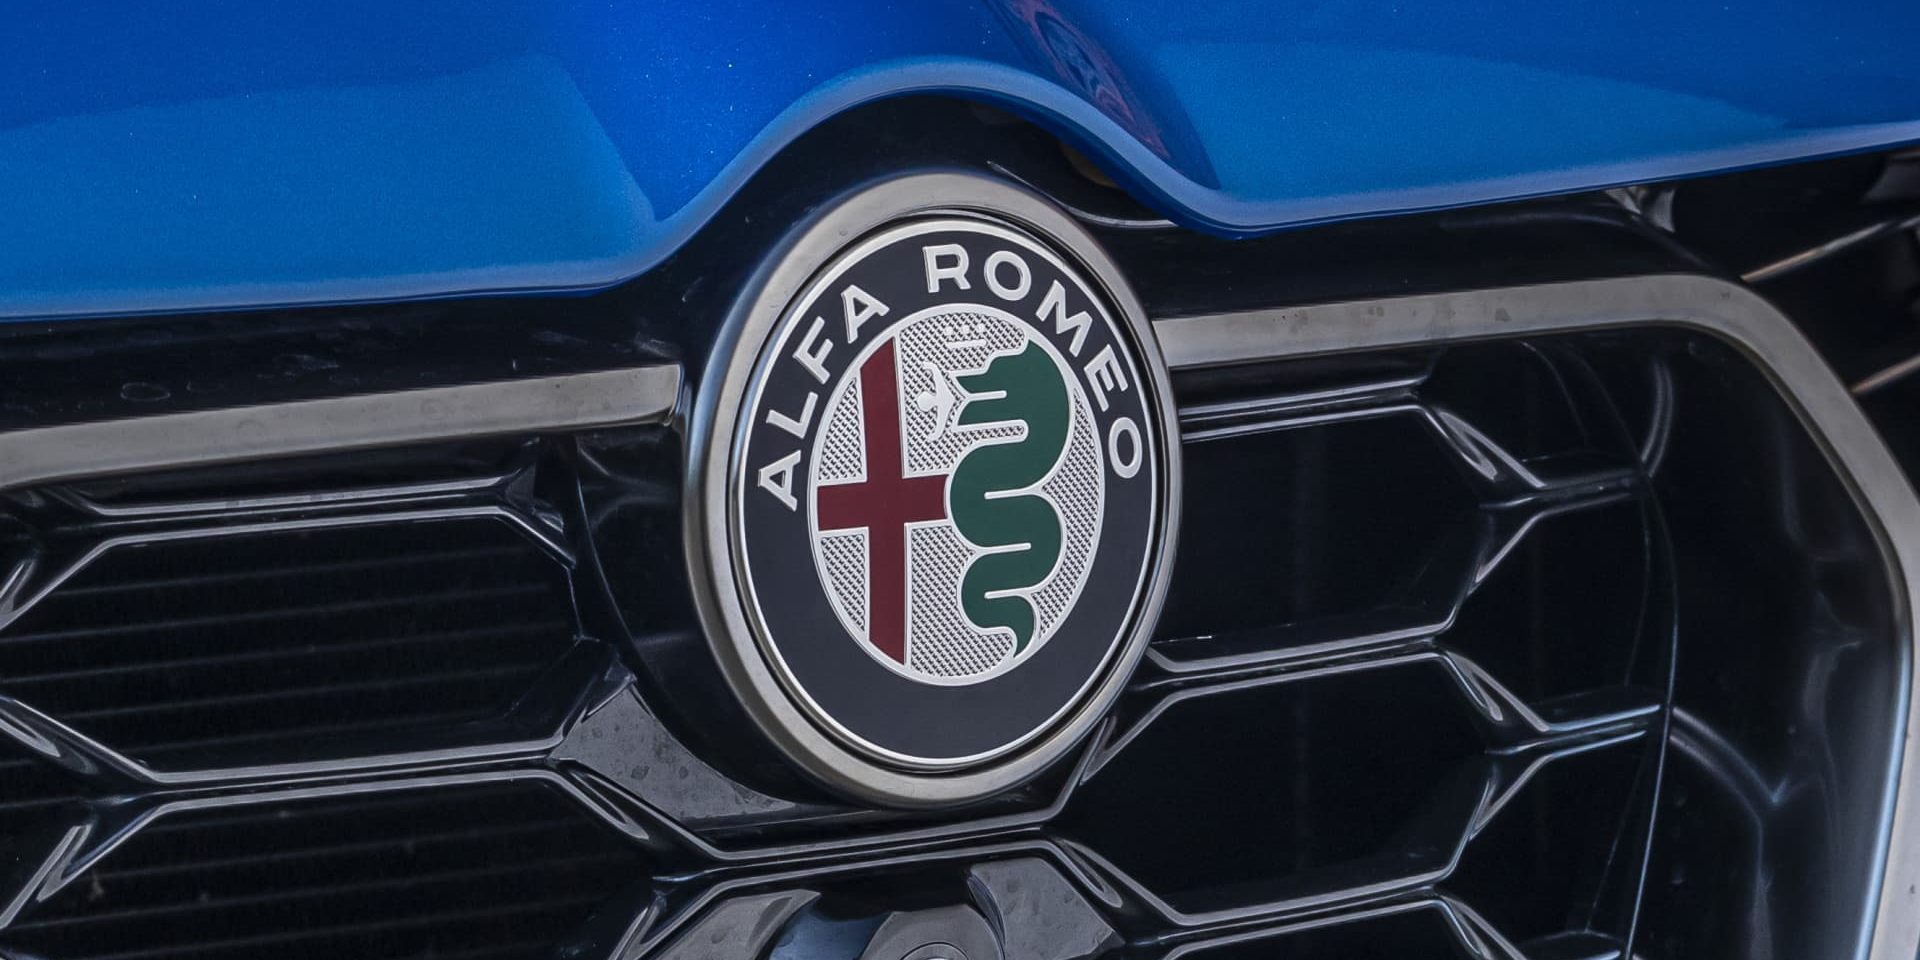 Alfa Romeo supercar name reportedly uncovered